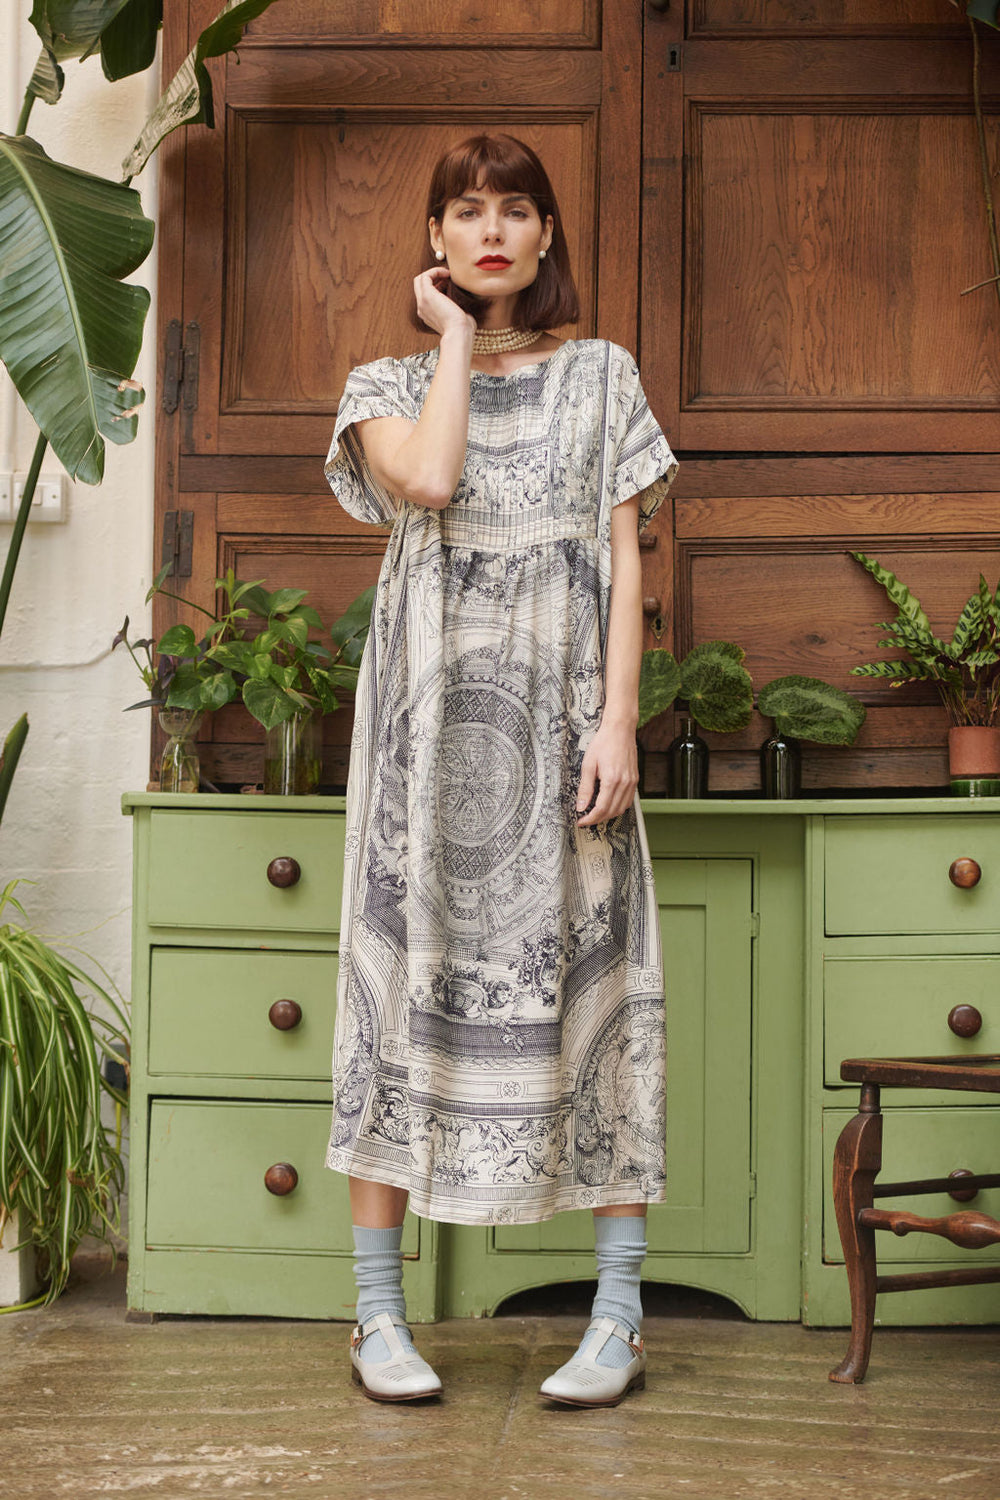 vintage alternative neutral printed pleated smock dress by One Hundred Stars